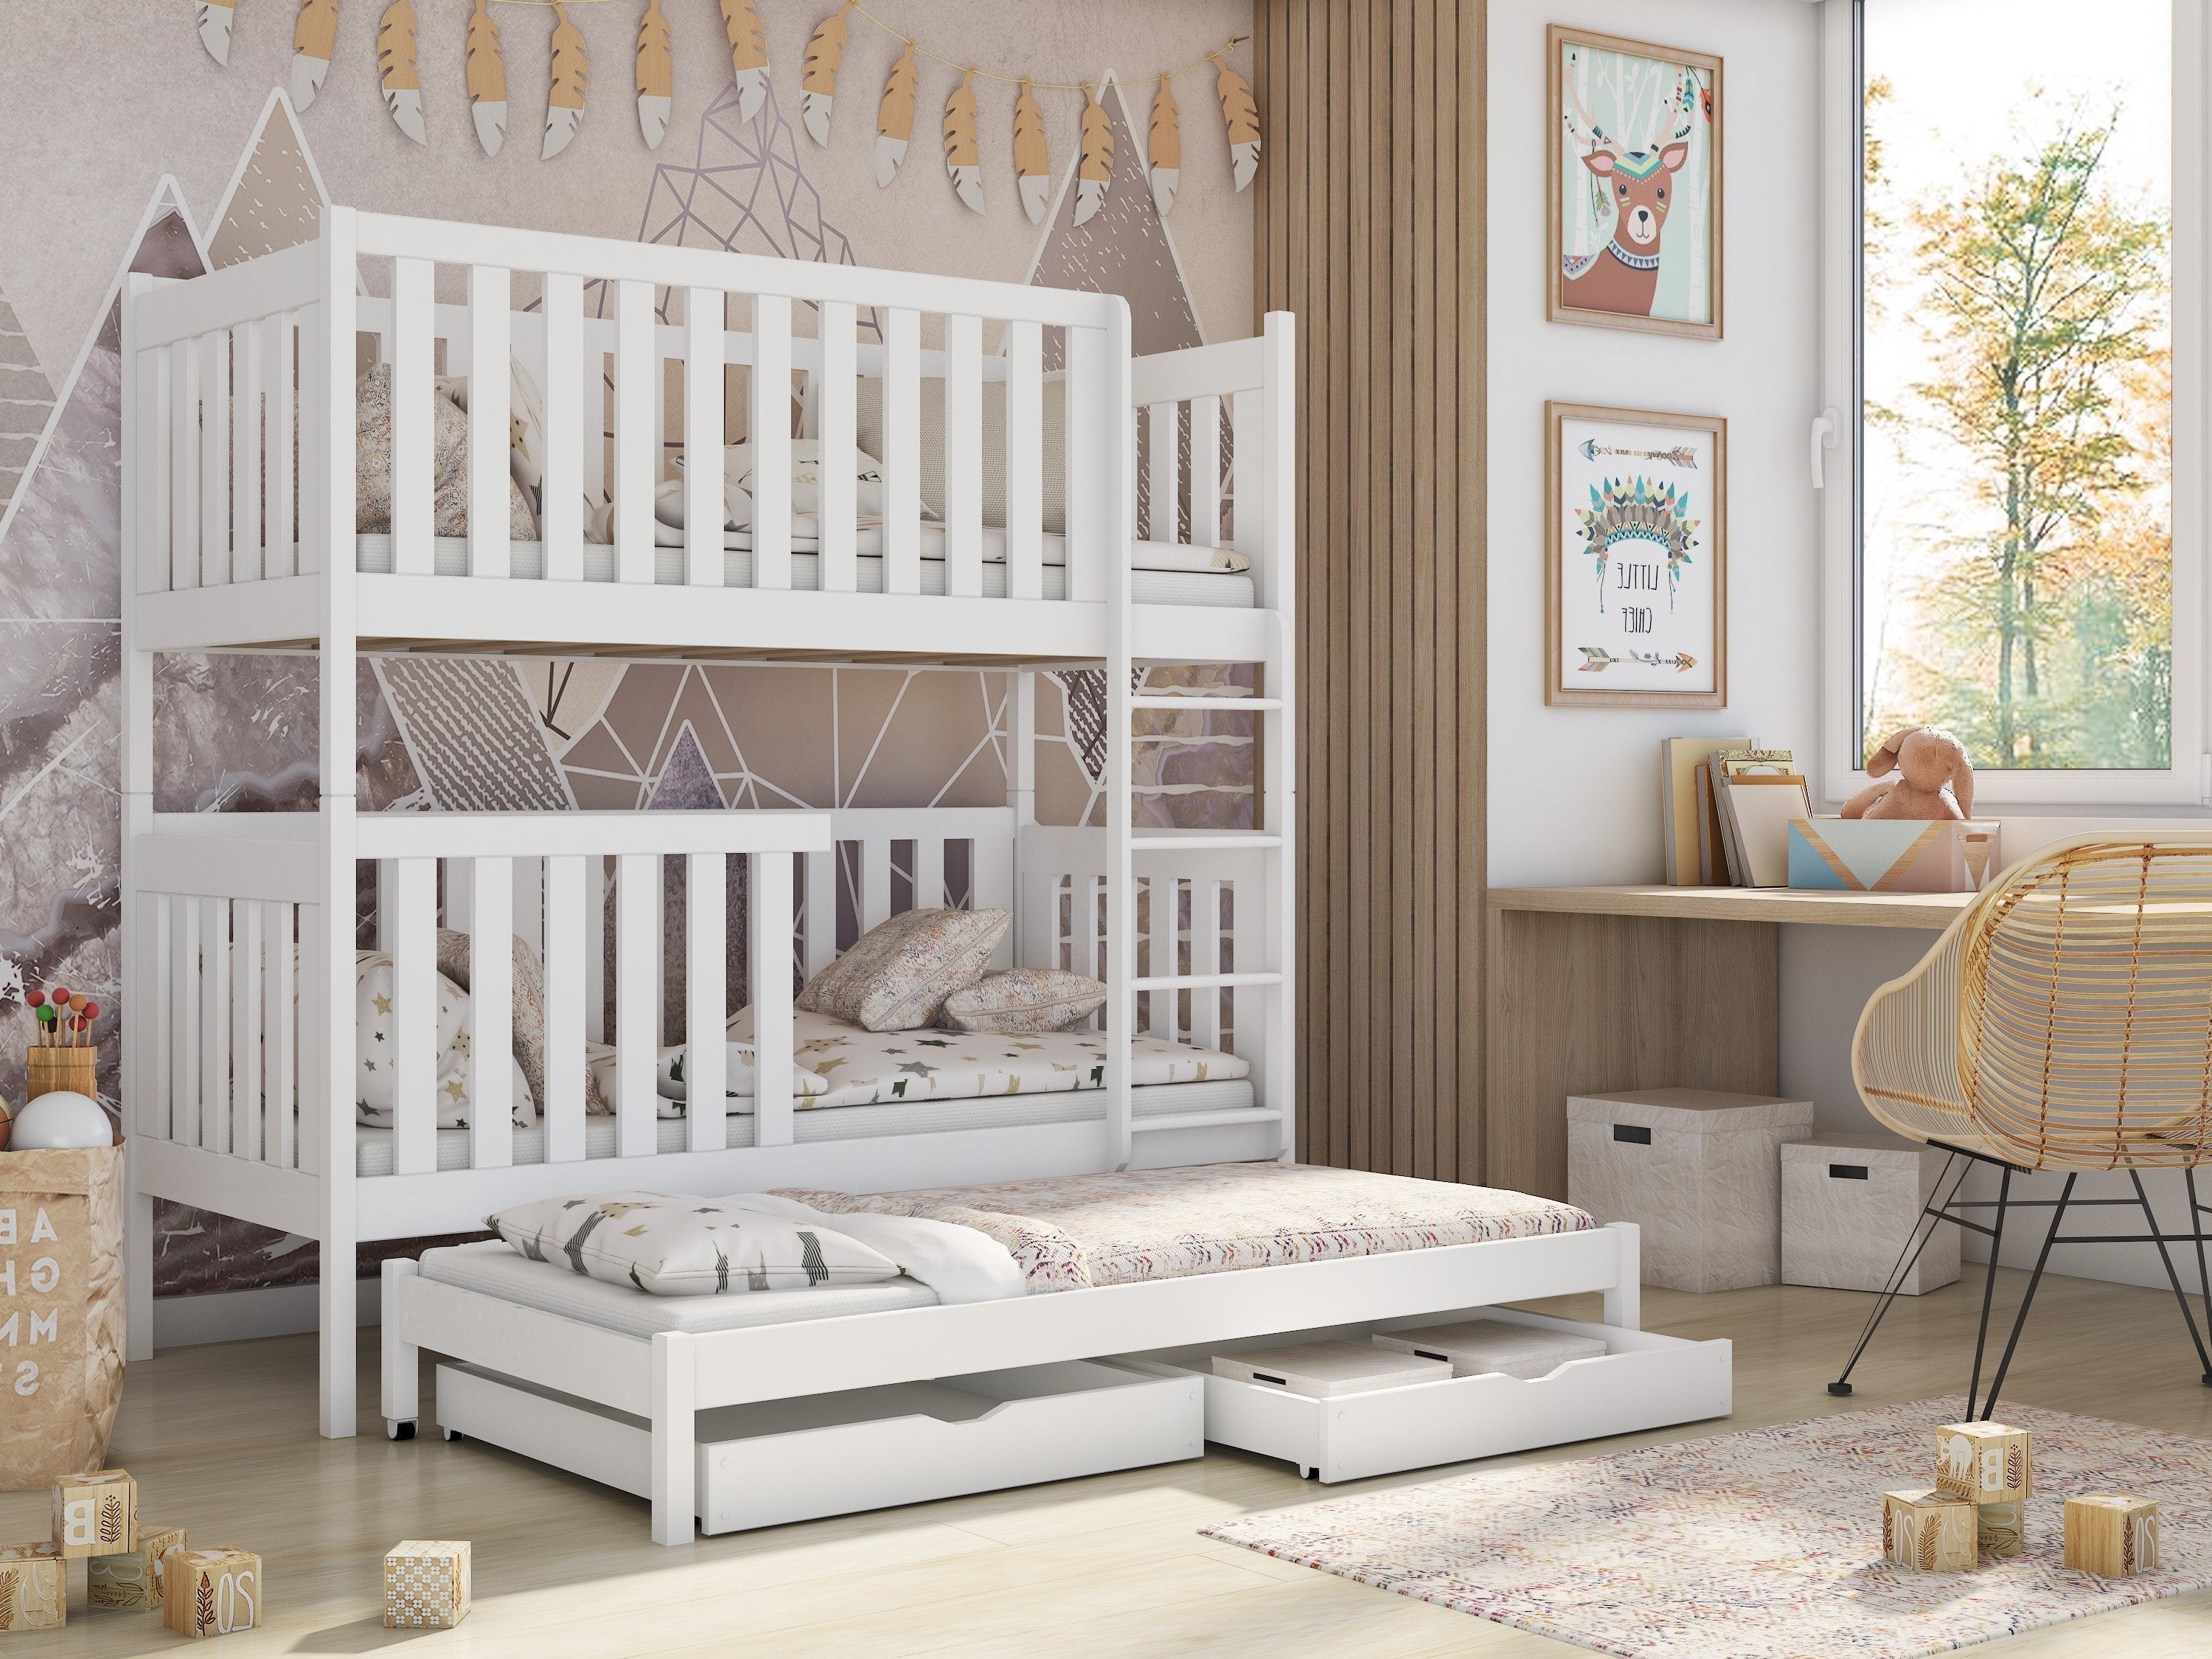 View Wooden Bunk Bed Emily with Trundle and Storage White Matt Without Mattresses information